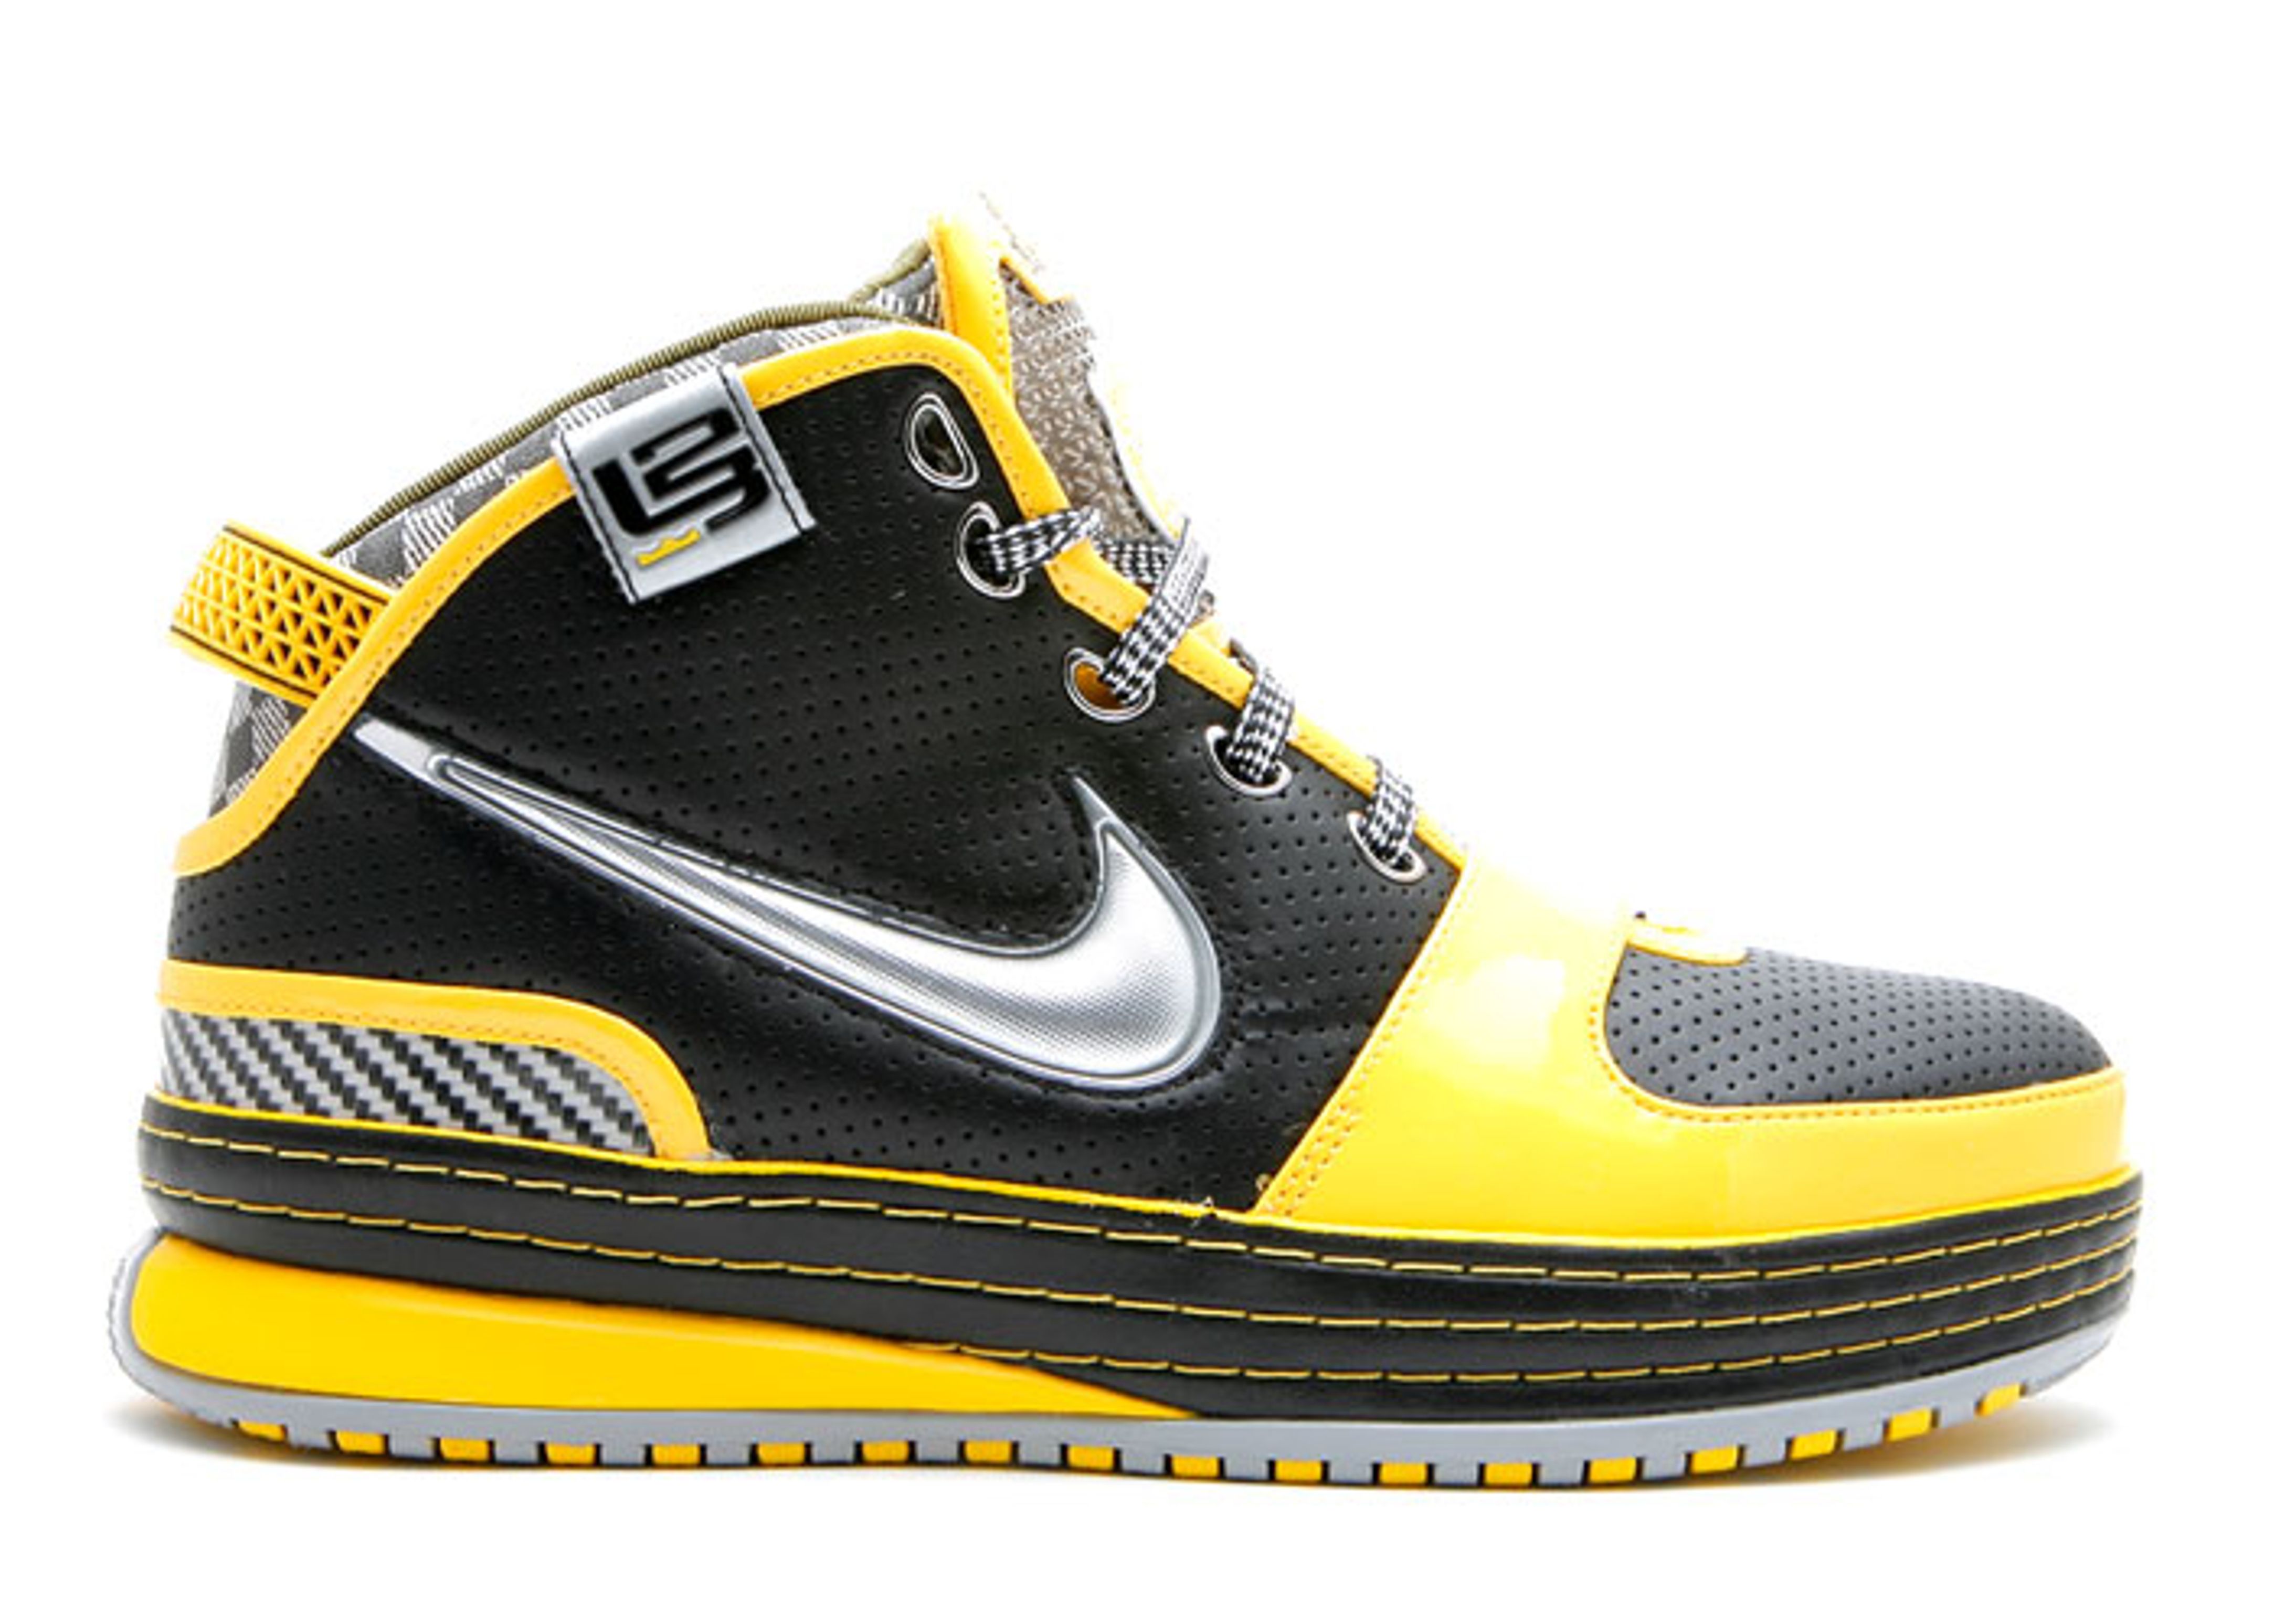 Image result for lebron taxi 4